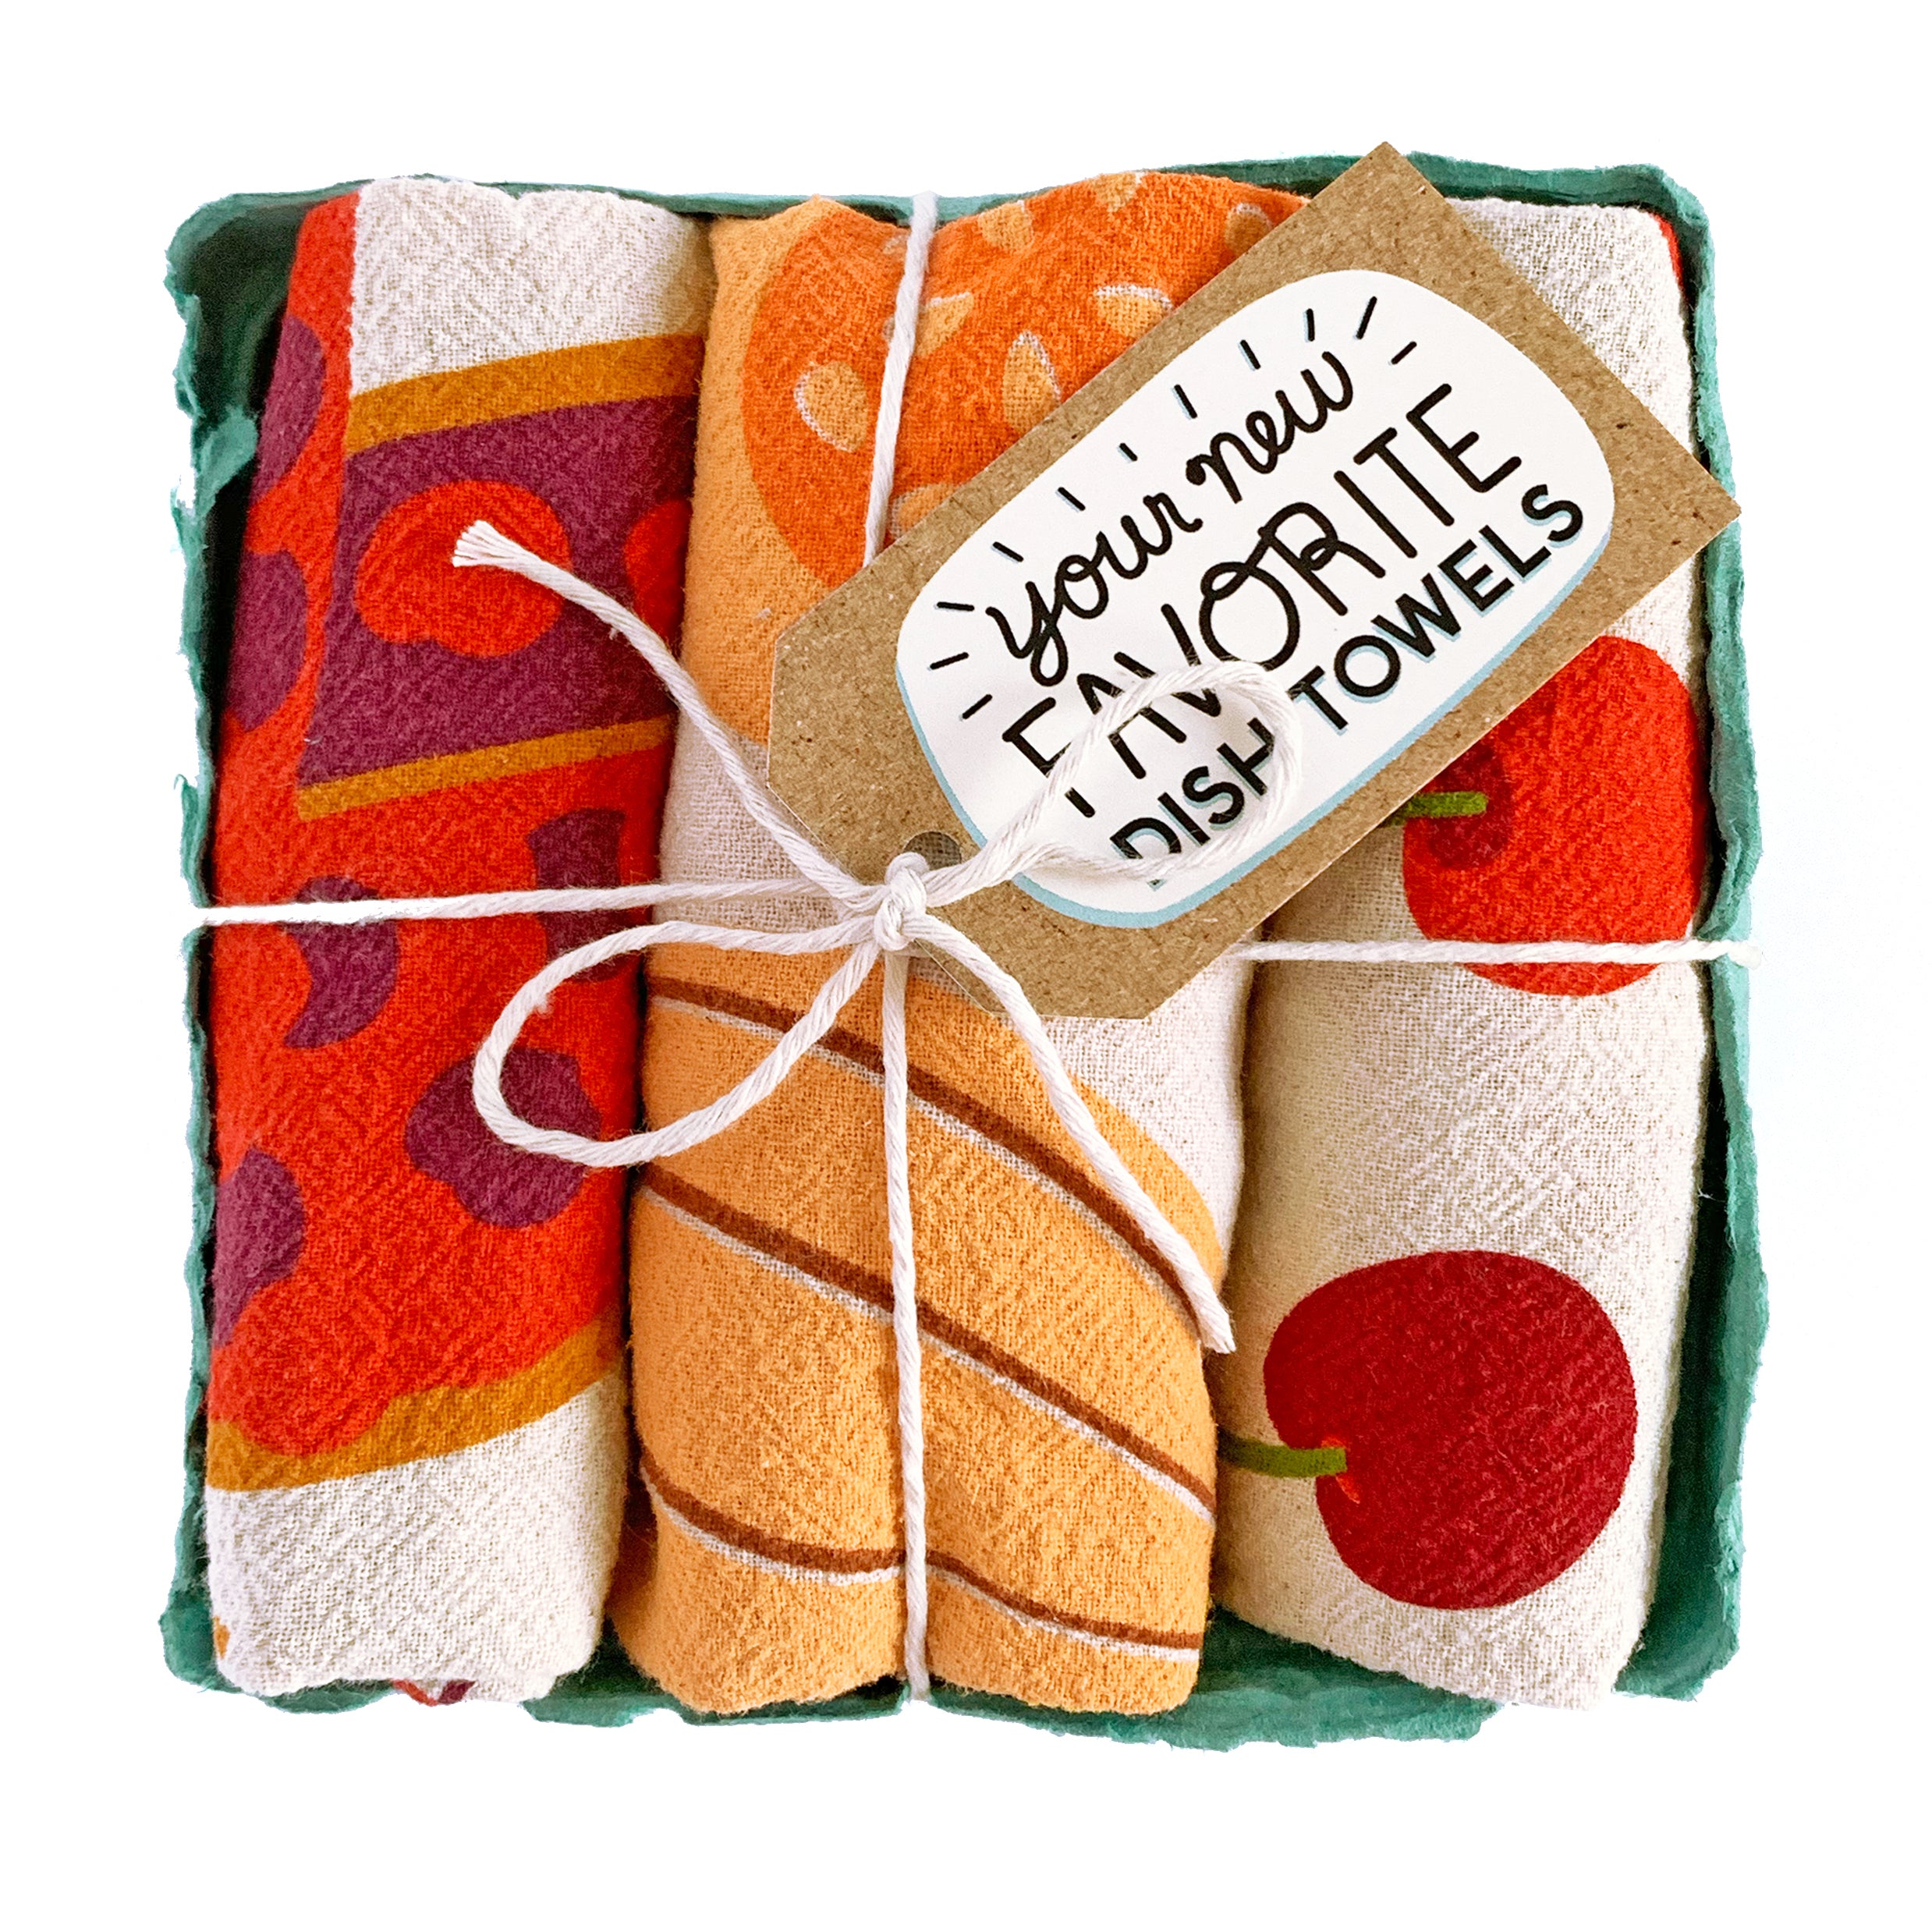 Fruit Stand - Dish Towel Set of 3 - The Neighborgoods